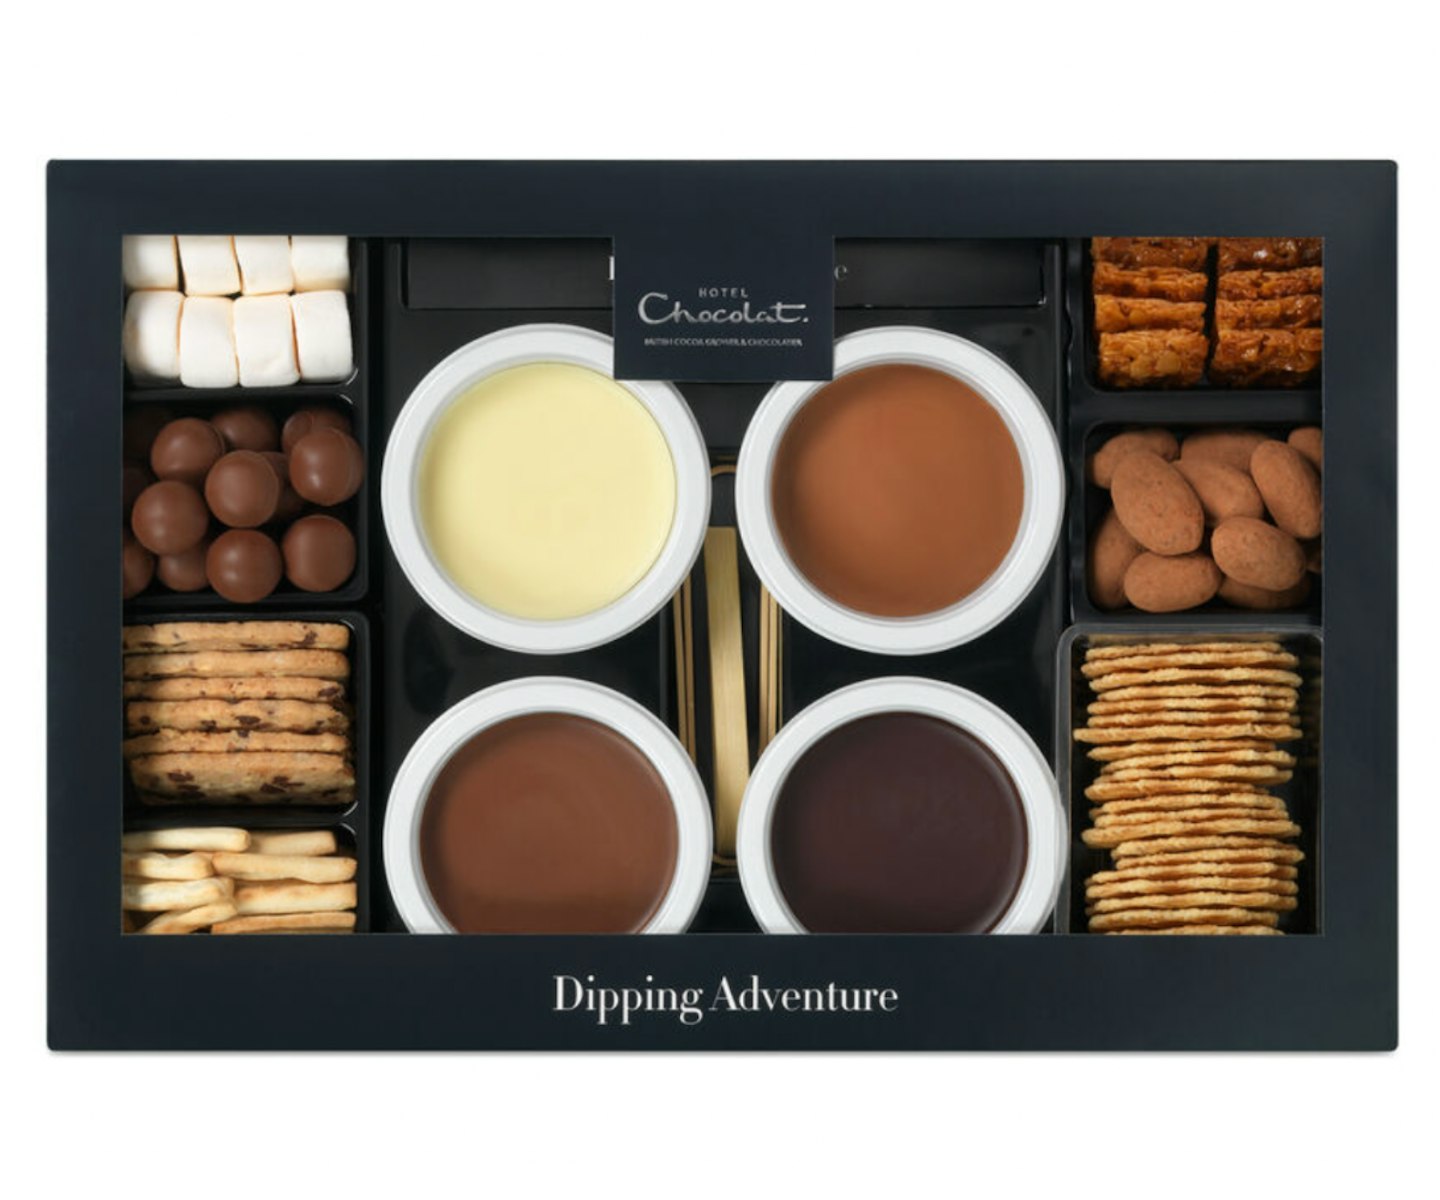 Large Chocolate Dipping Adventure